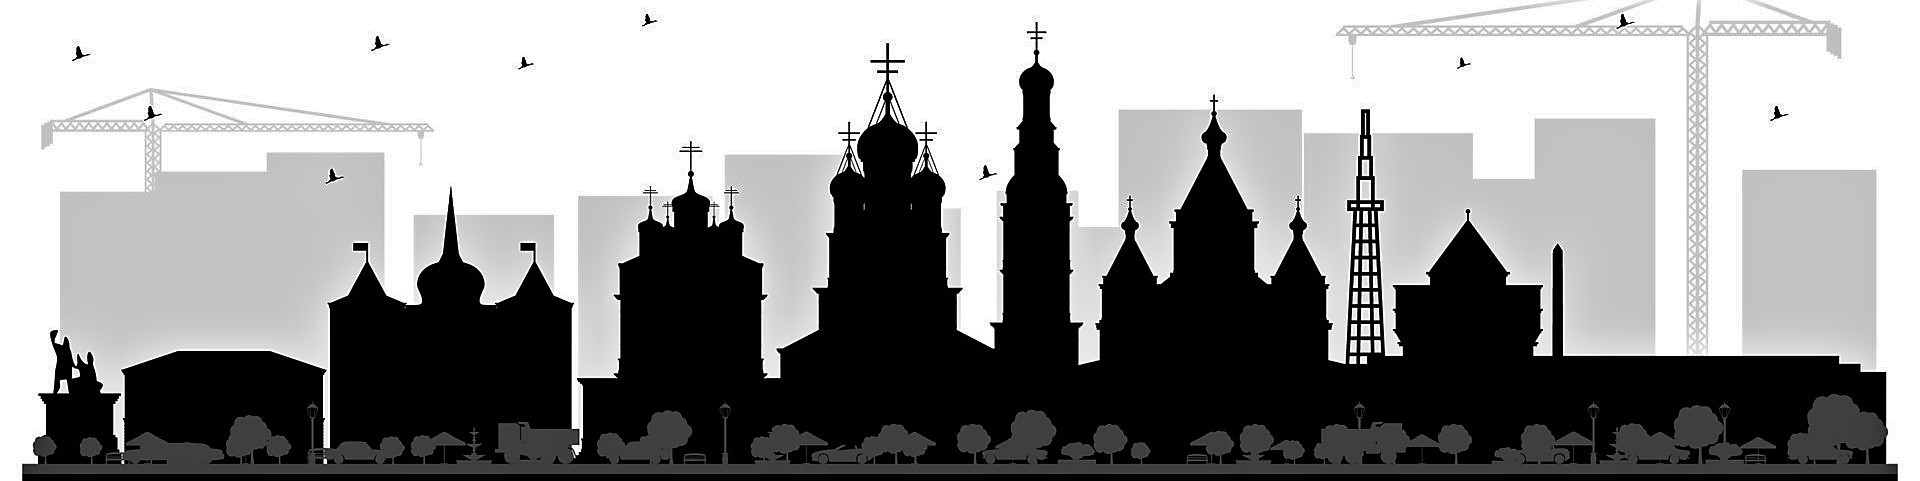 Nizhny-novgorod-russia-city-skyline-silhouette-with-black-buildings-and-reflections-isolated-on-white-background-vector.jpg